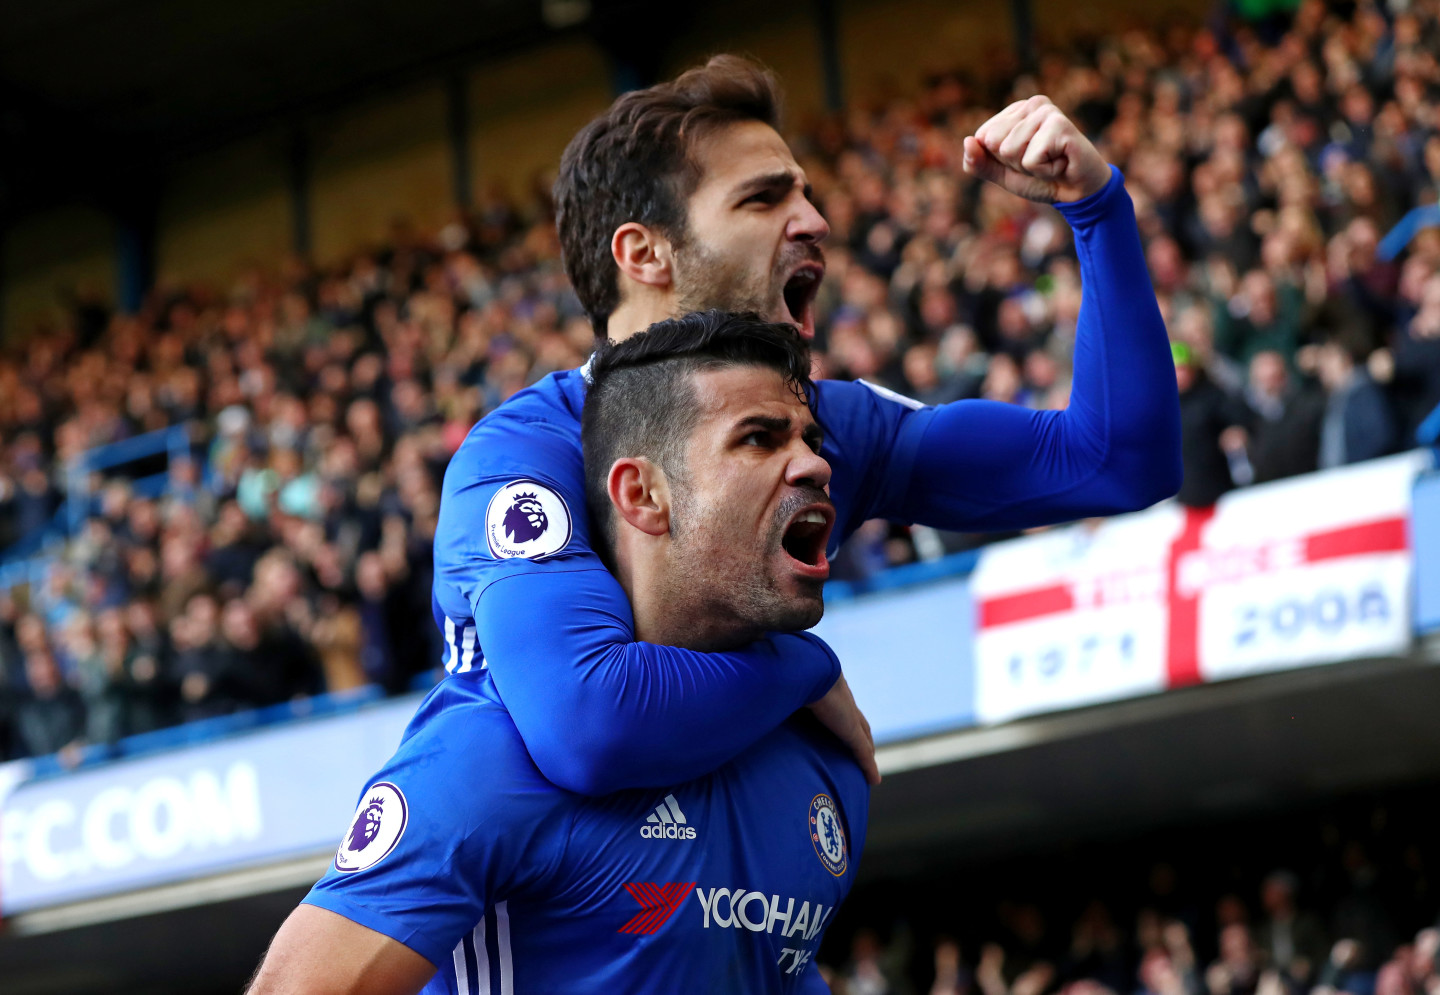 Cesc fabregas and his tight shorts. Too much info. Chelsea fc